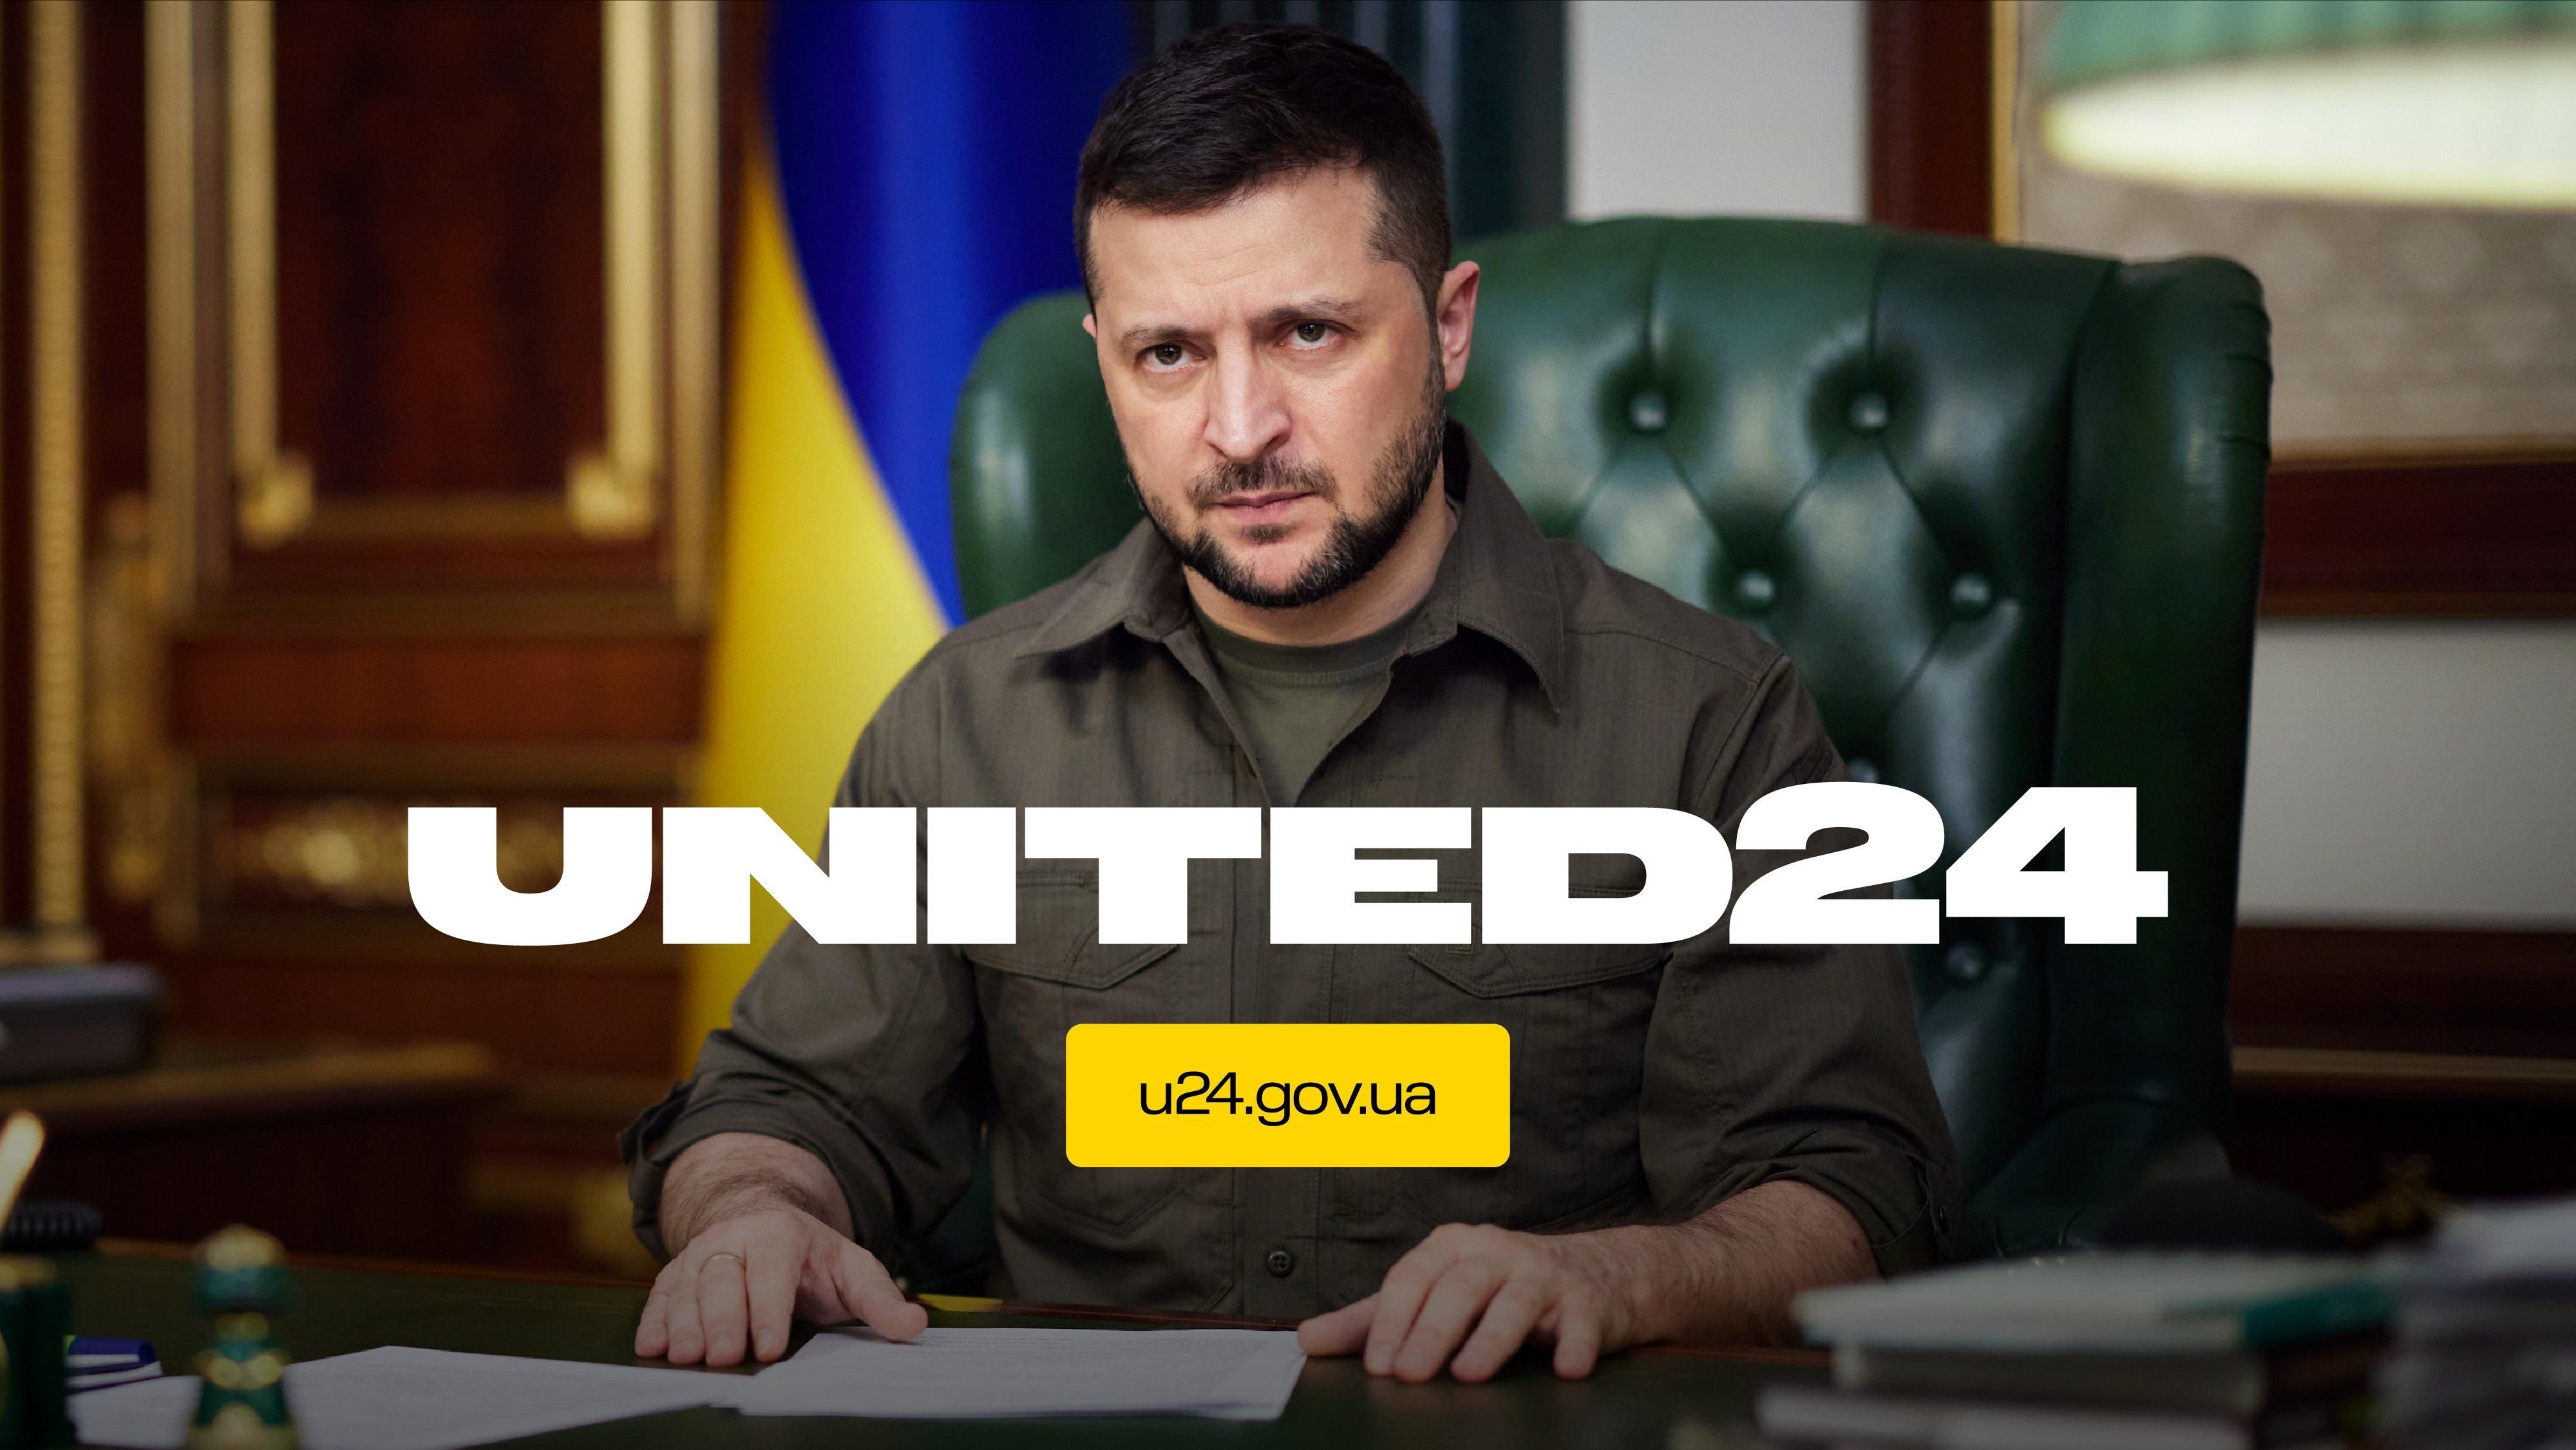 Shevchenko became the first ambassador of the UNITED 24 - en